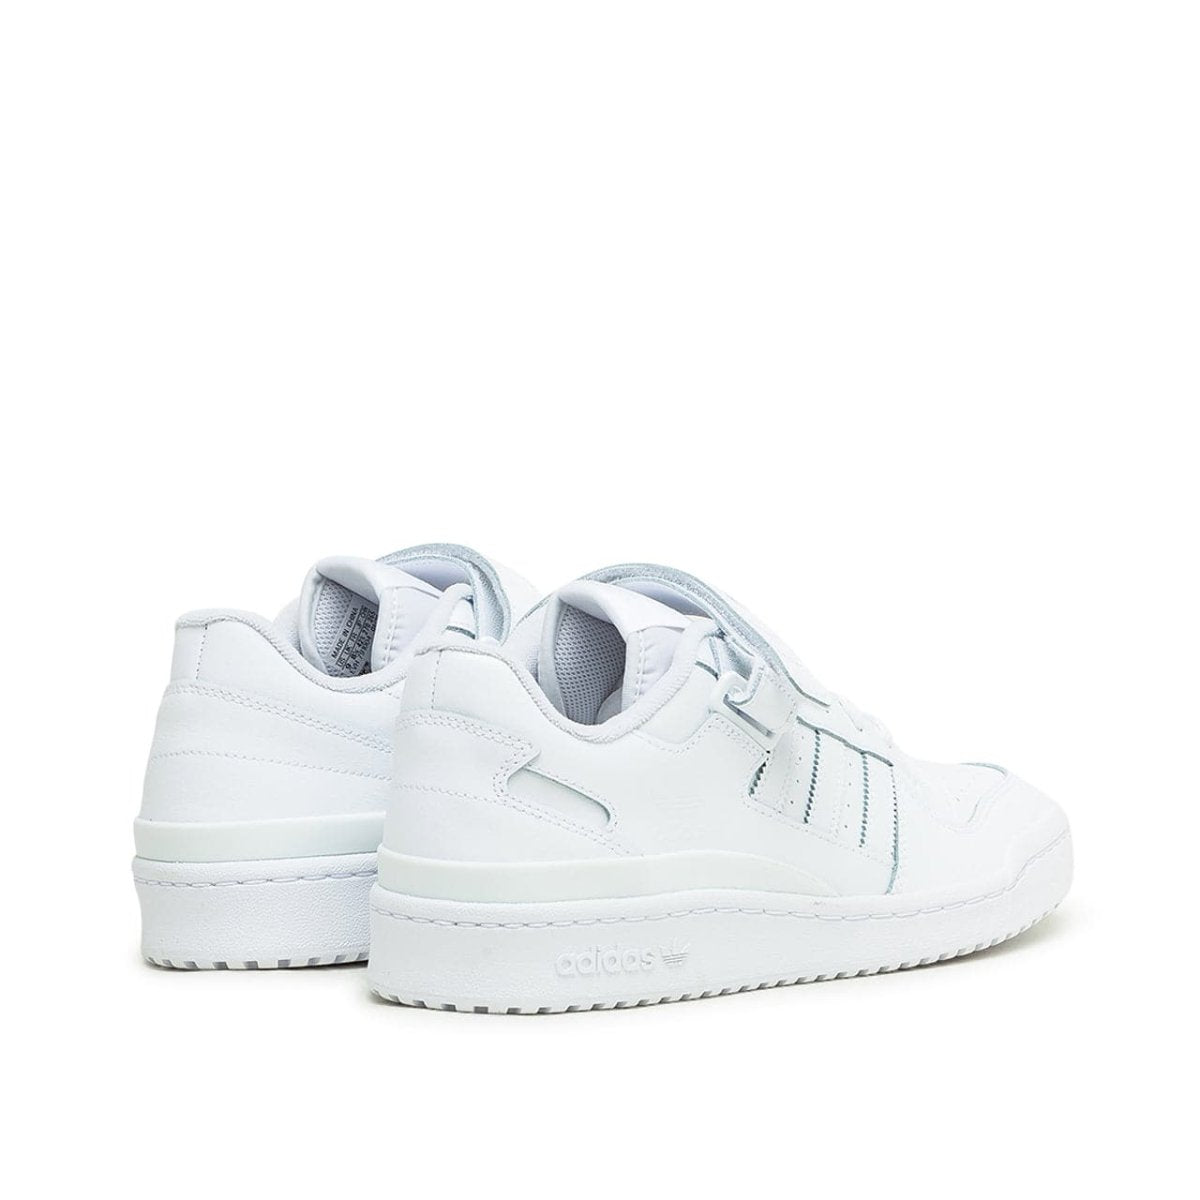 adidas Forum Low (White) FY7755 – Allike Store